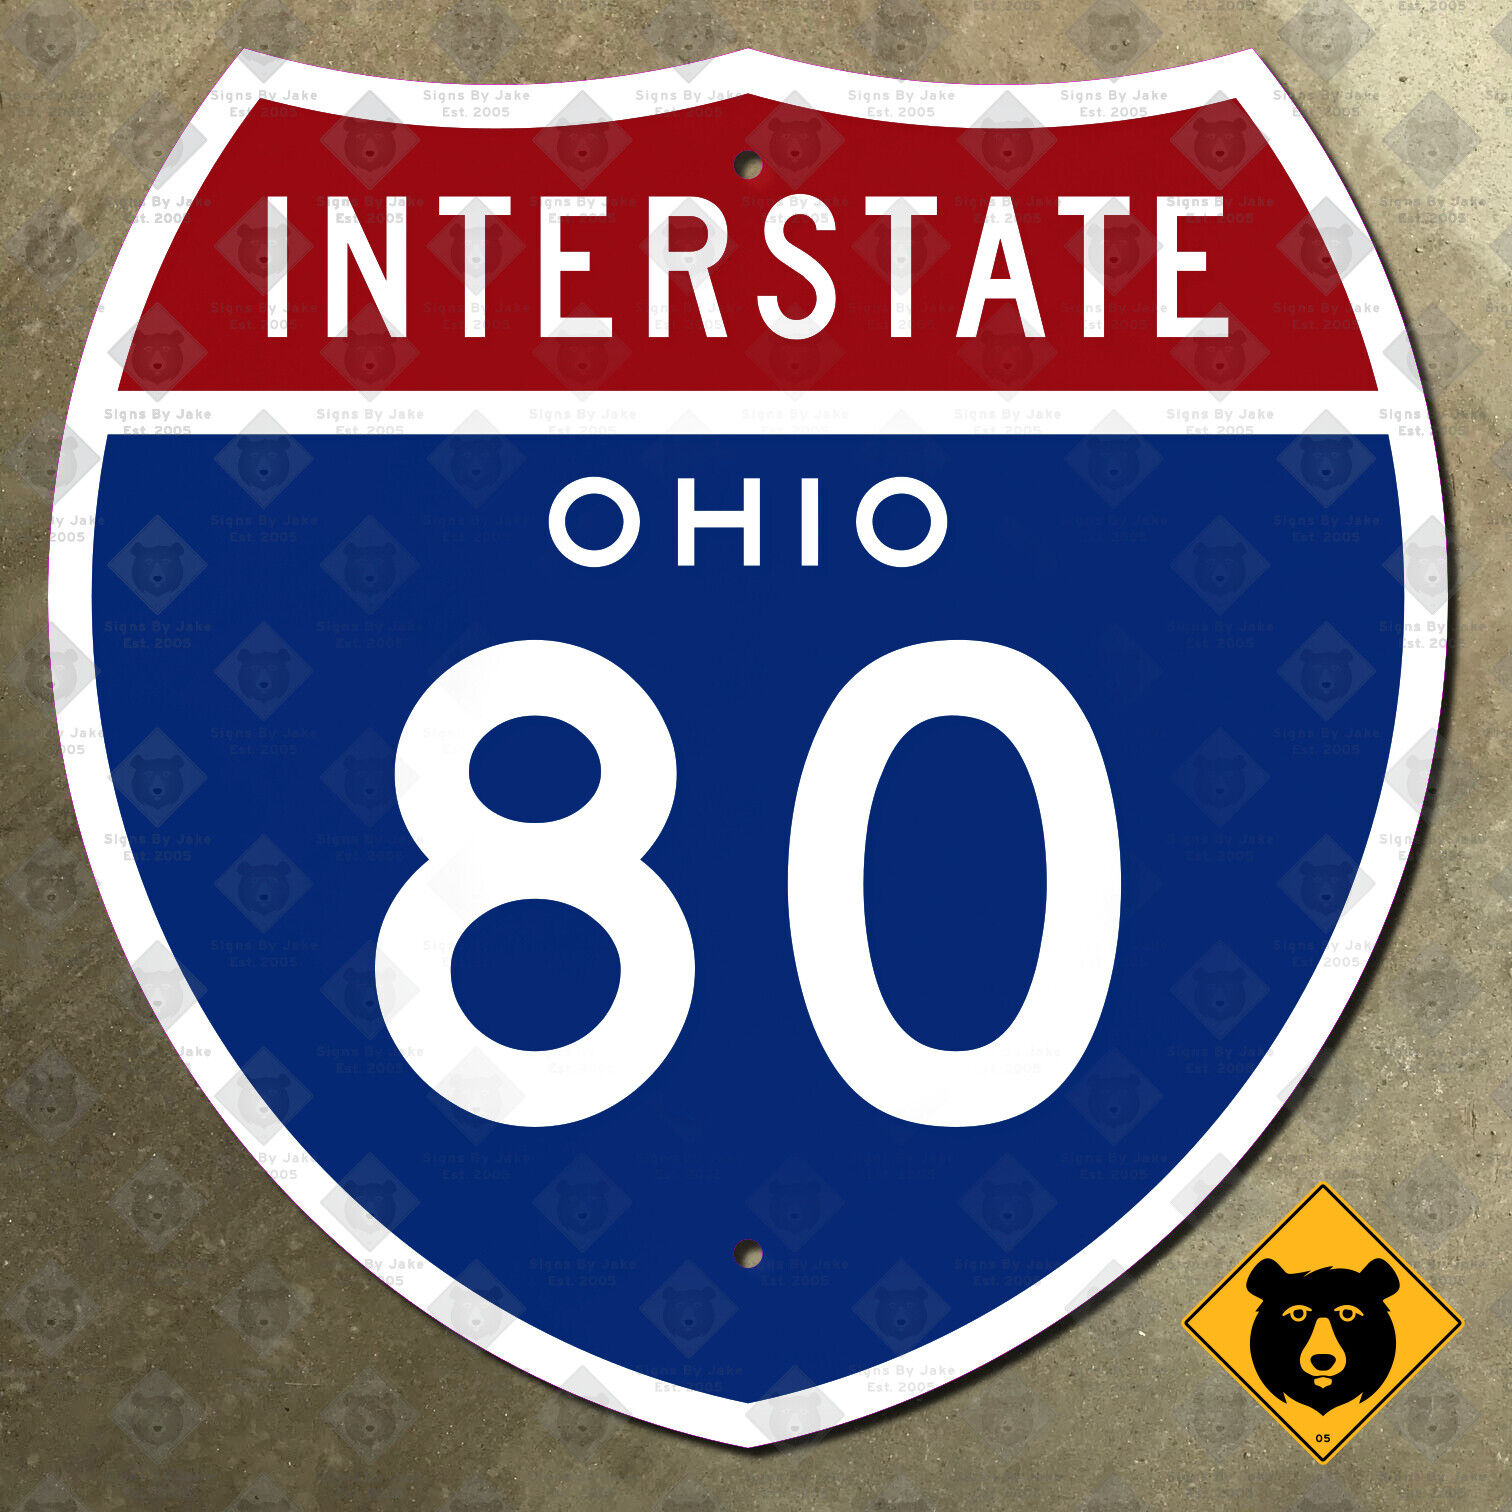 Ohio Interstate 80 route marker 1957 northern state highway sign 18x18